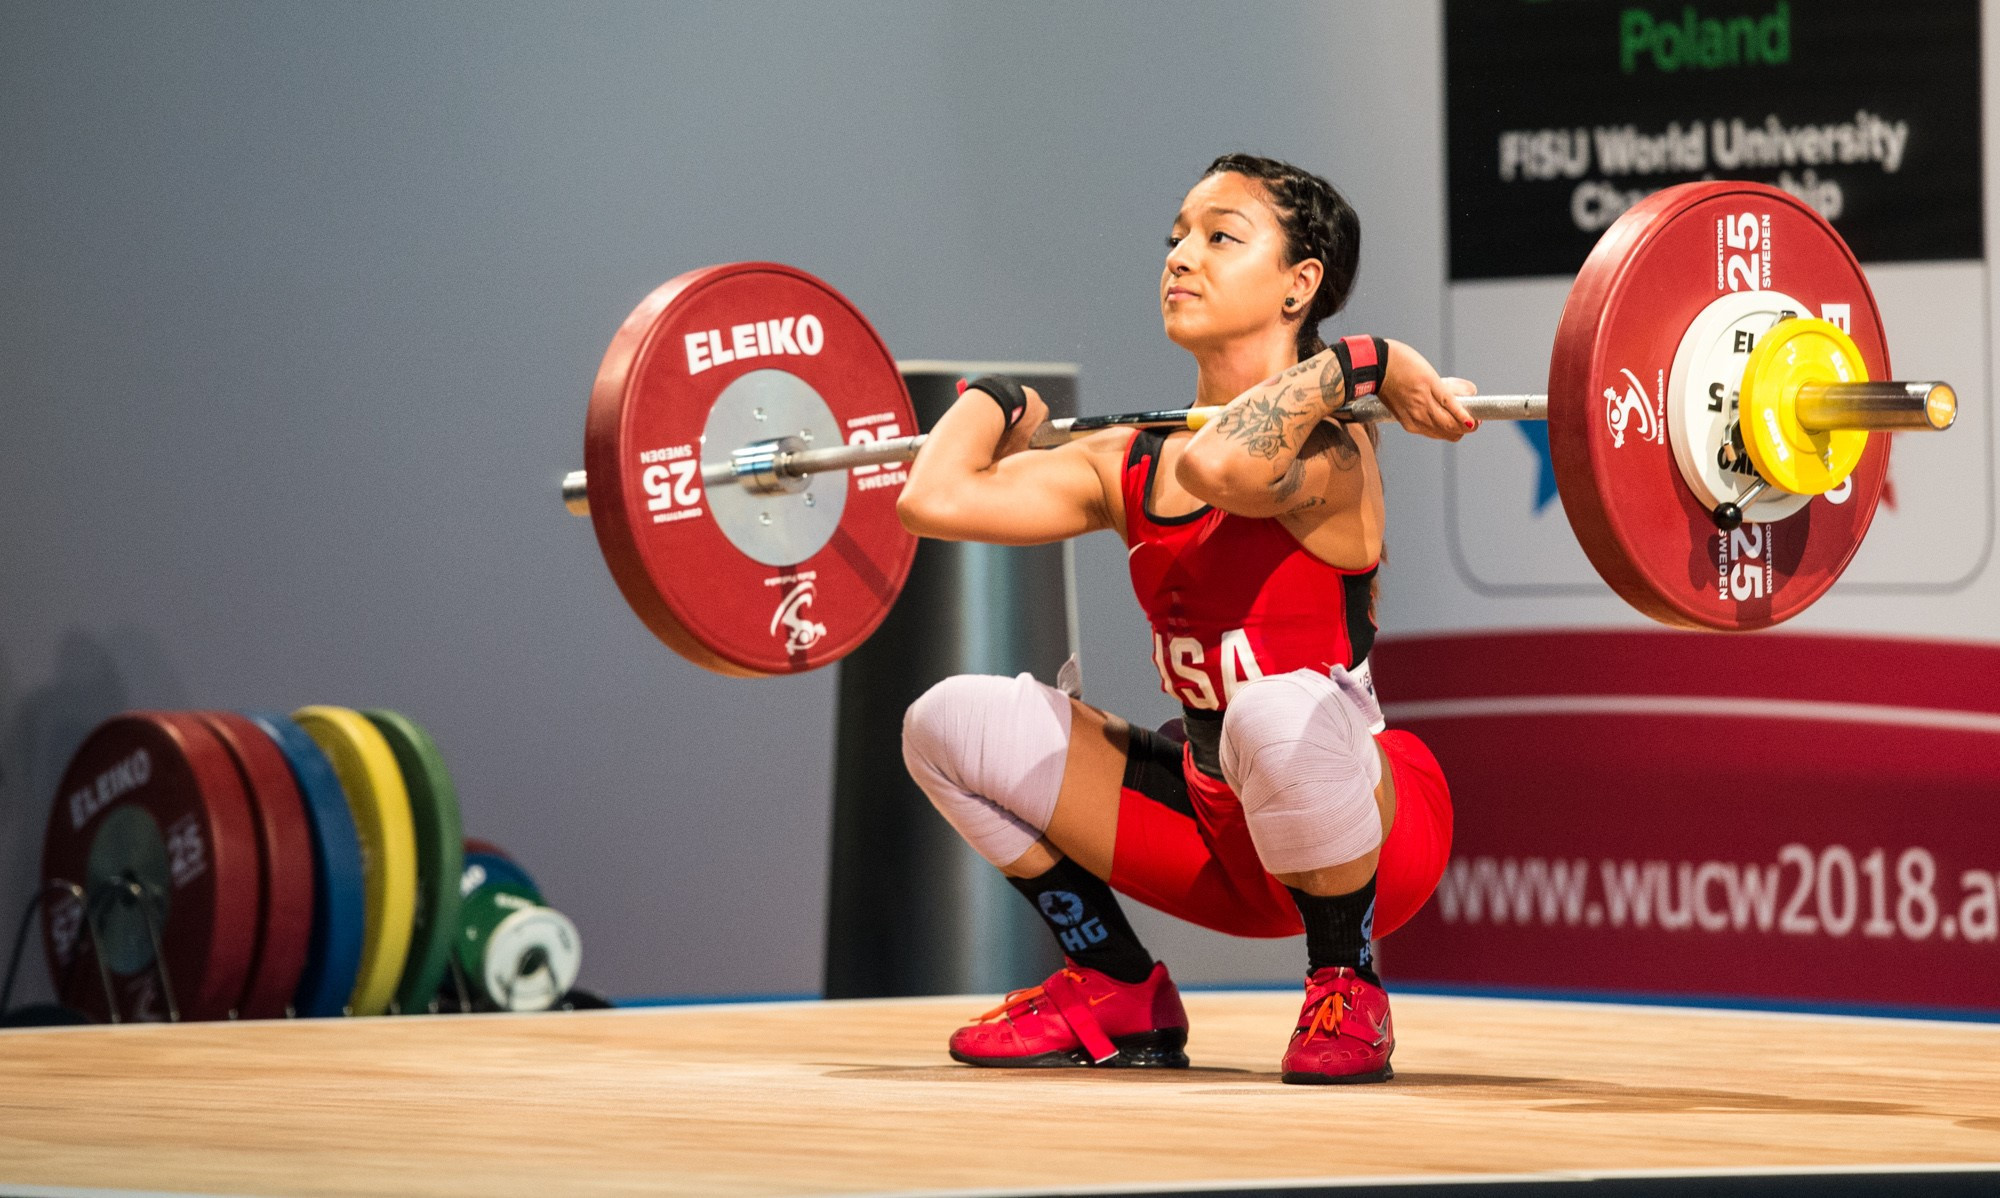 Competition began at the FISU Wold University Weightlifting Champonships in Poland ©World University Weightlifting Championships